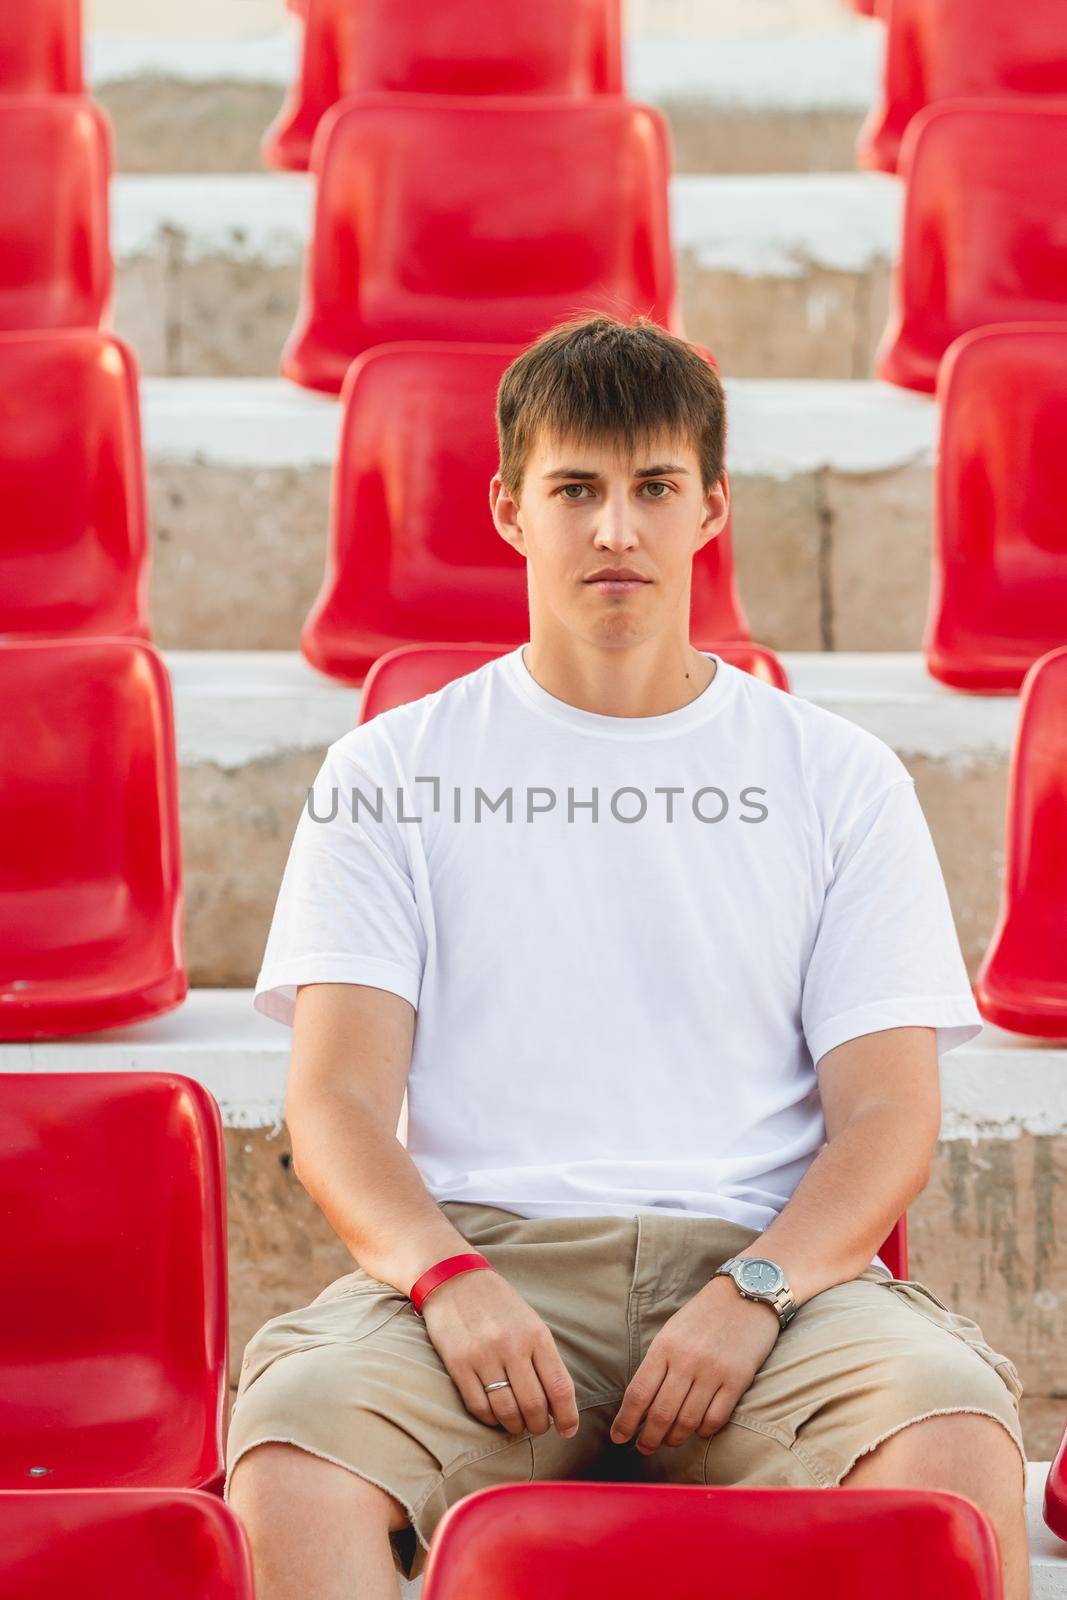 Bored young man sitting in deserted audience with bright red seats. Absence of people in open-air amphitheater due to coronavirus COVID-19 pandemic lockdown and quarantine.